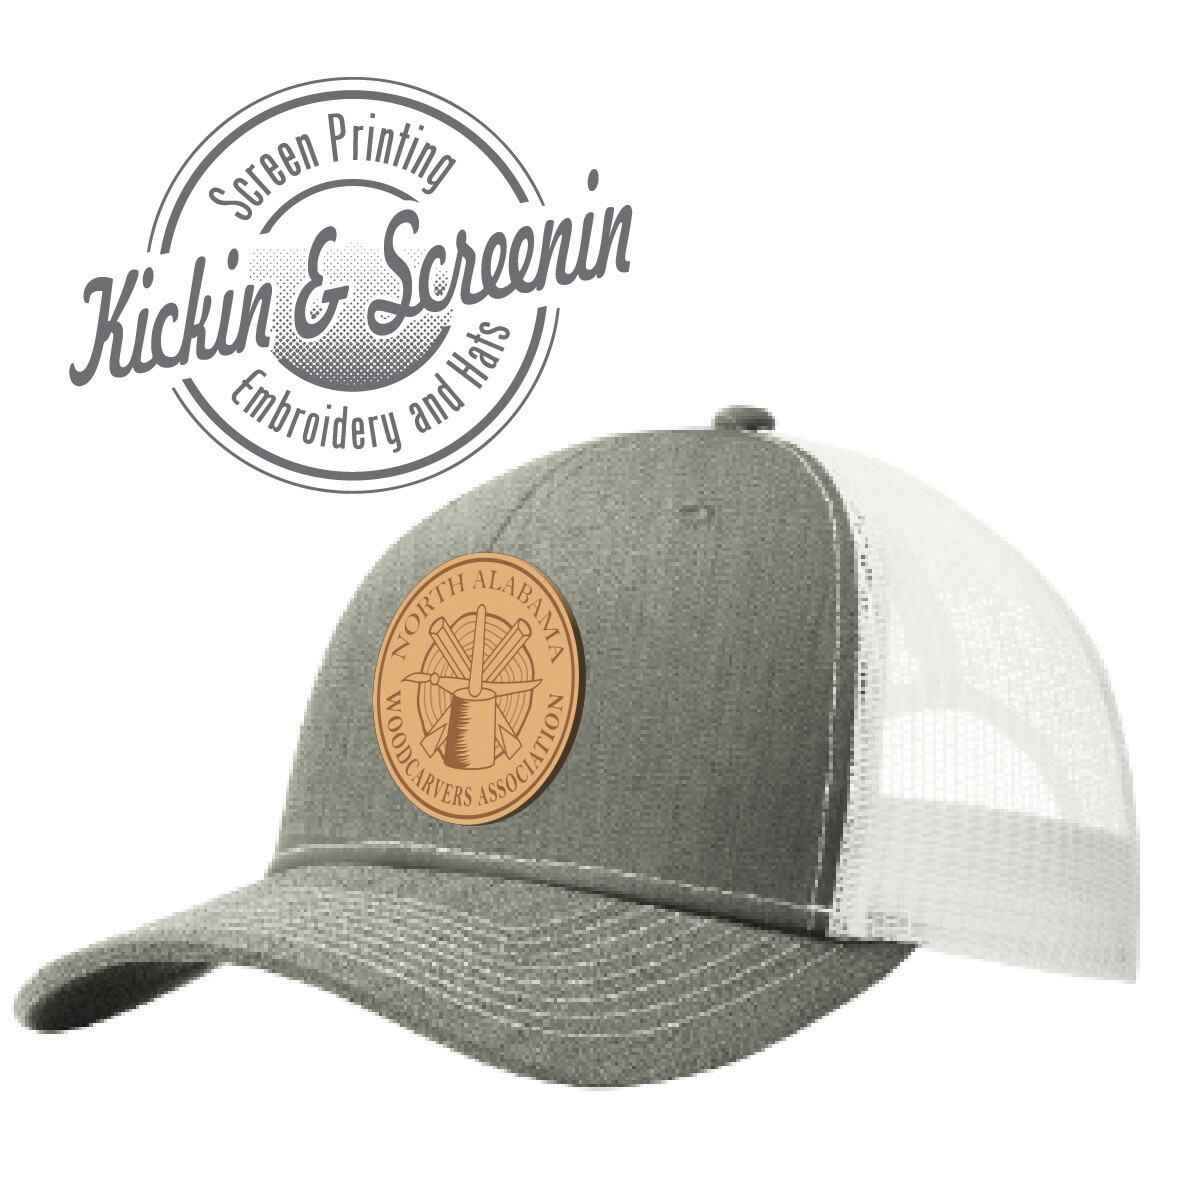 NAWA Leather Patch Hat Heather Gray and White